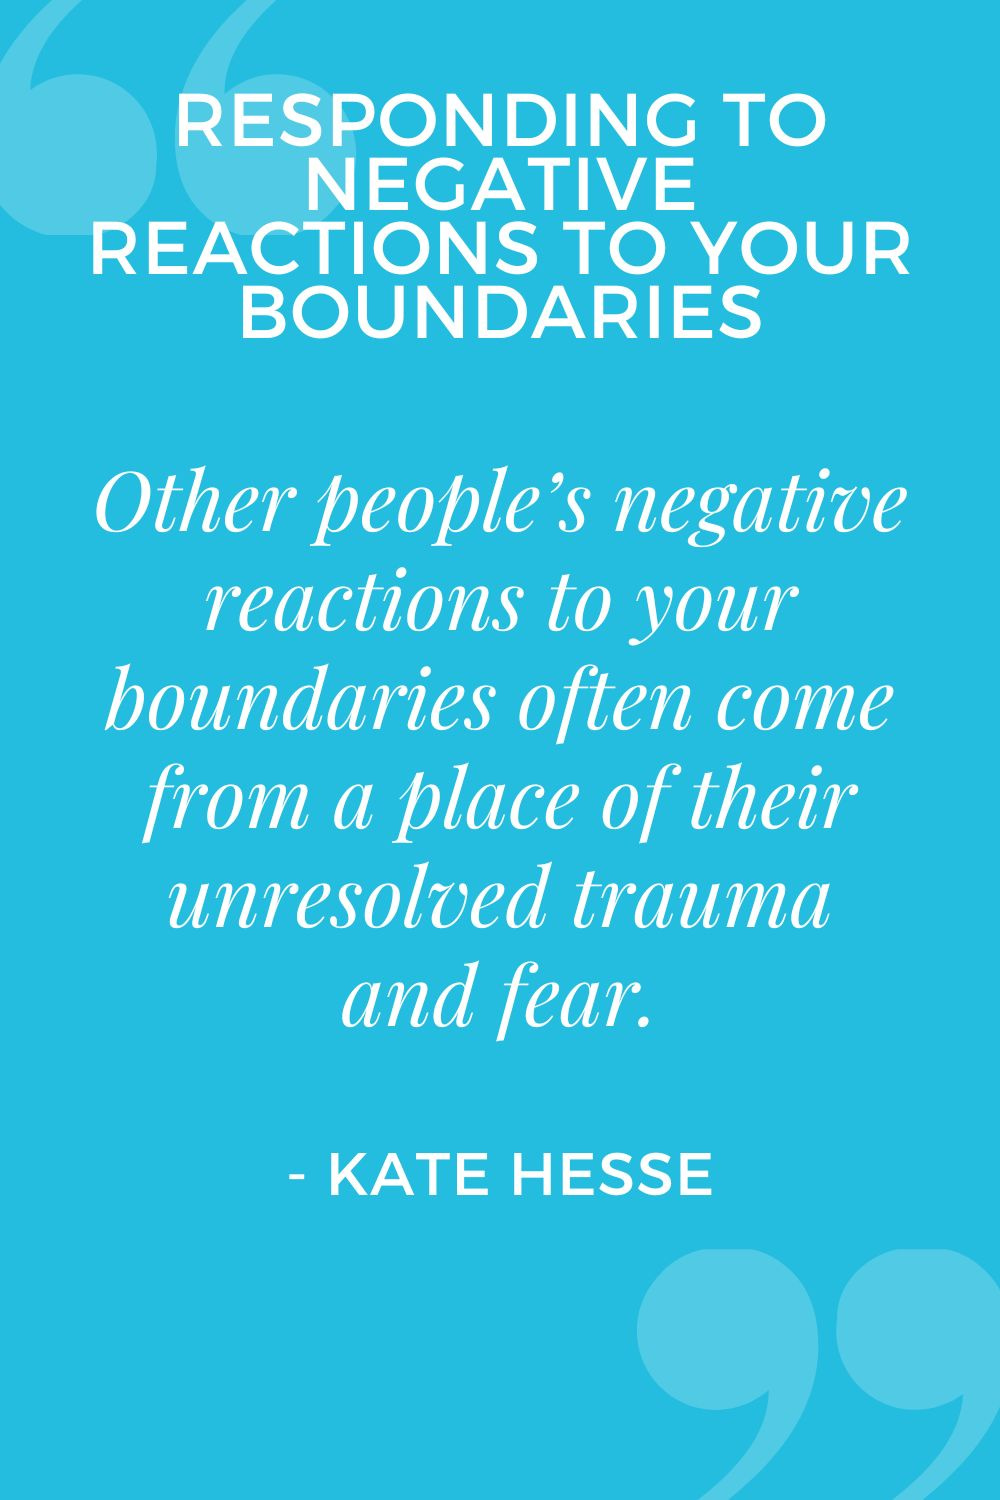 Other people's negative reactions to your boundaries often come from a place of their unresolved trauma and fear.